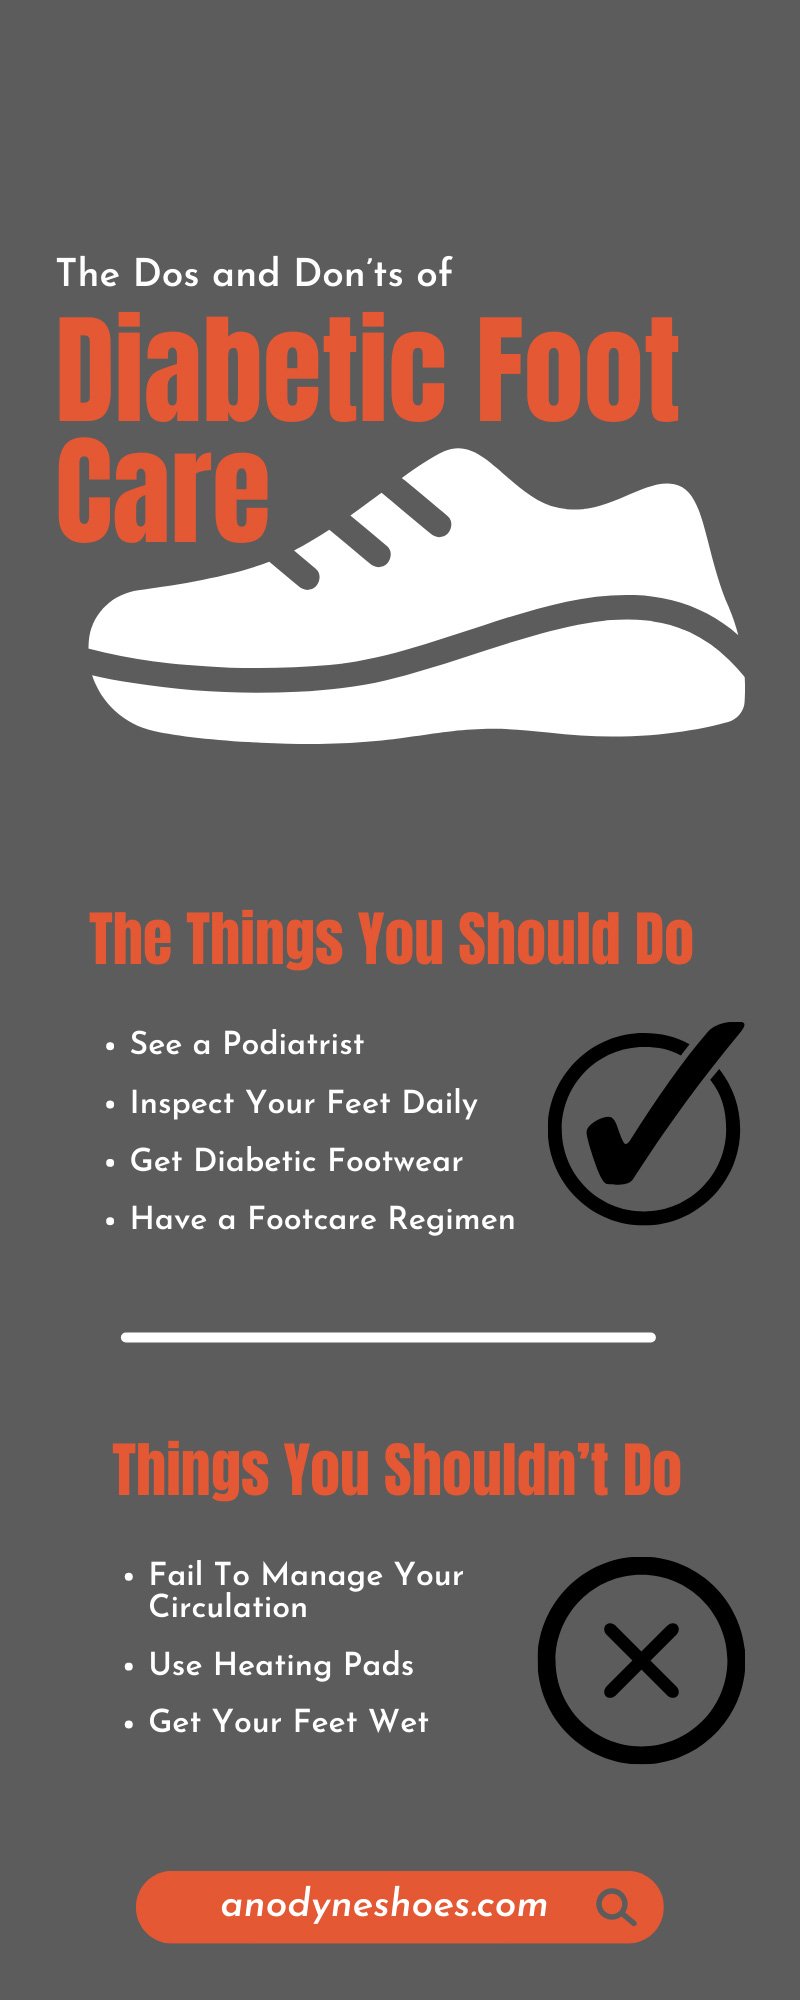 The Dos and Don’ts of Diabetic Foot Care